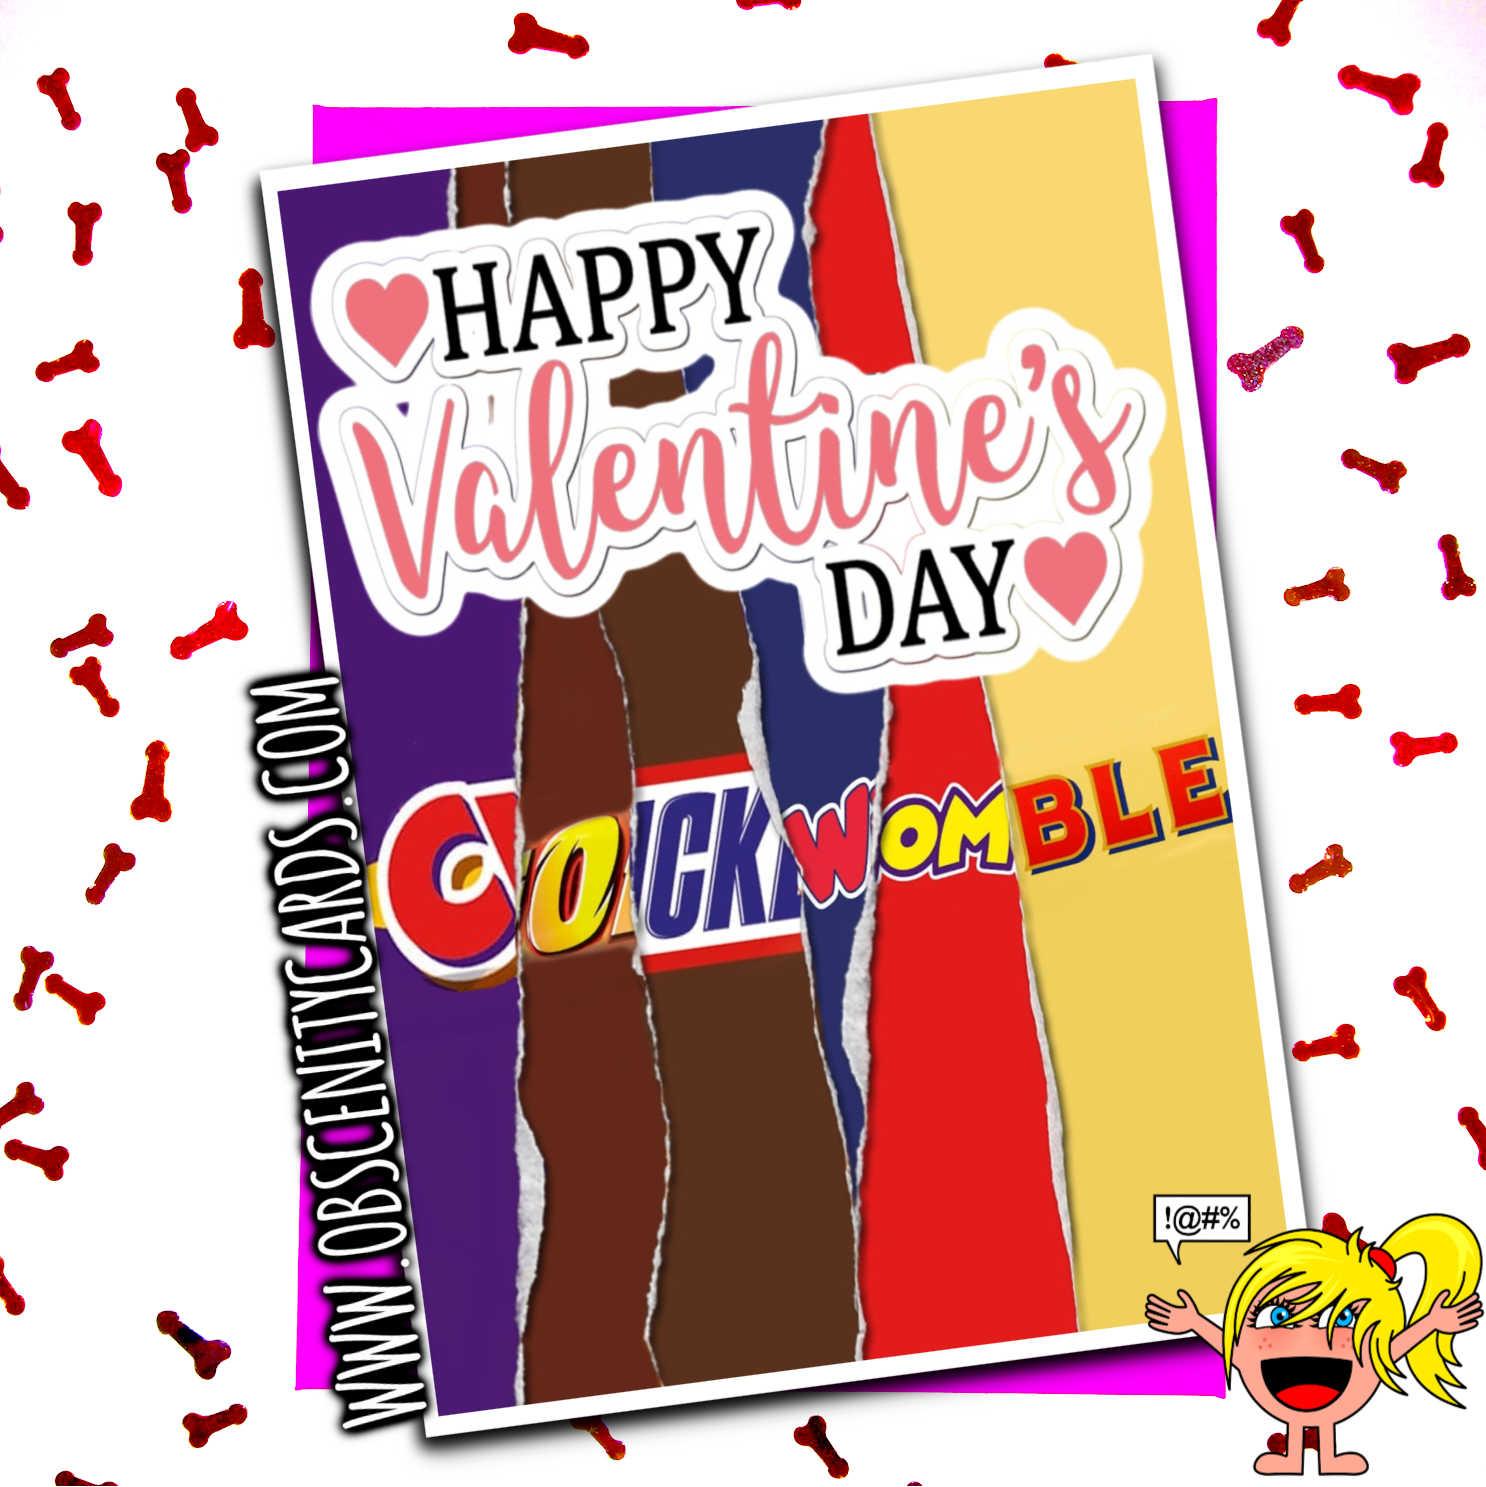 HAPPY VALENTINE'S DAY COCK WOMBLE CHOCOLATE WRAPPER FUNNY VALENTINES CARD